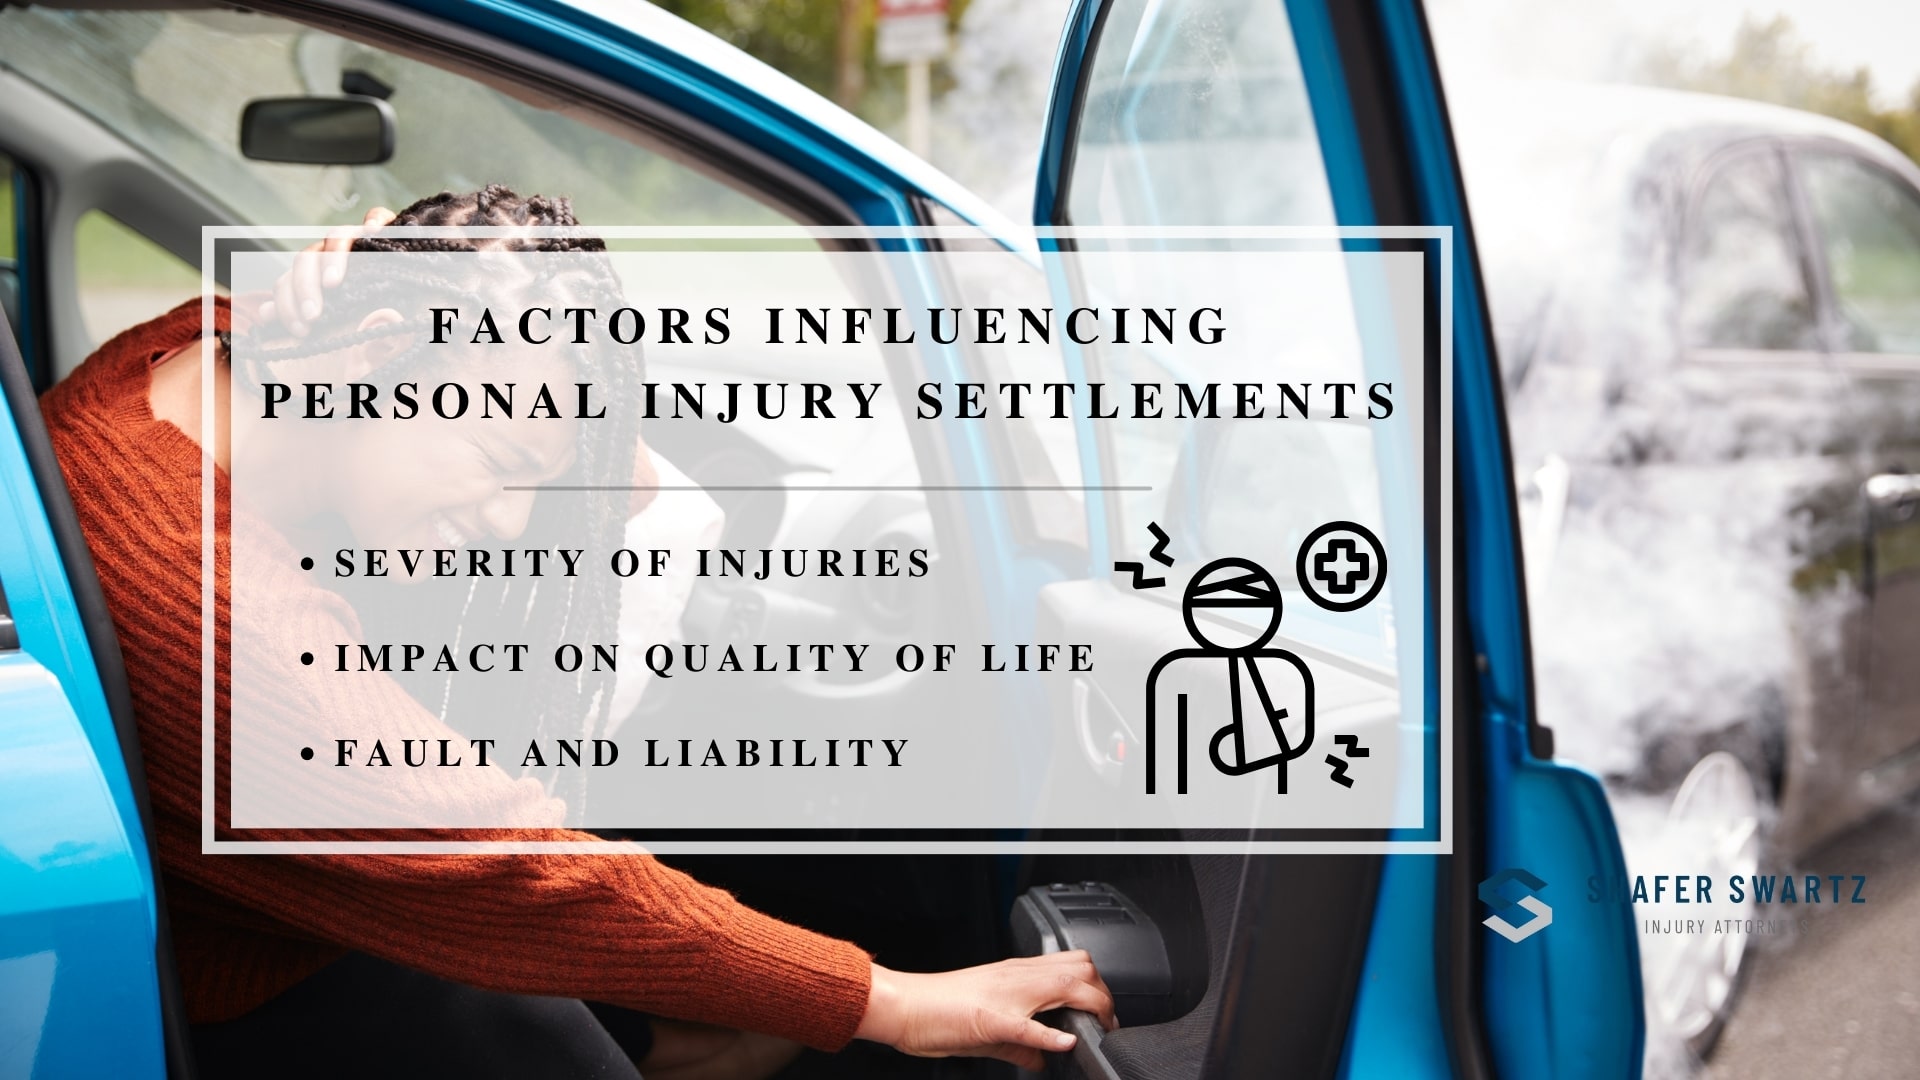 Infographic image of factors influencing personal injury settlements 